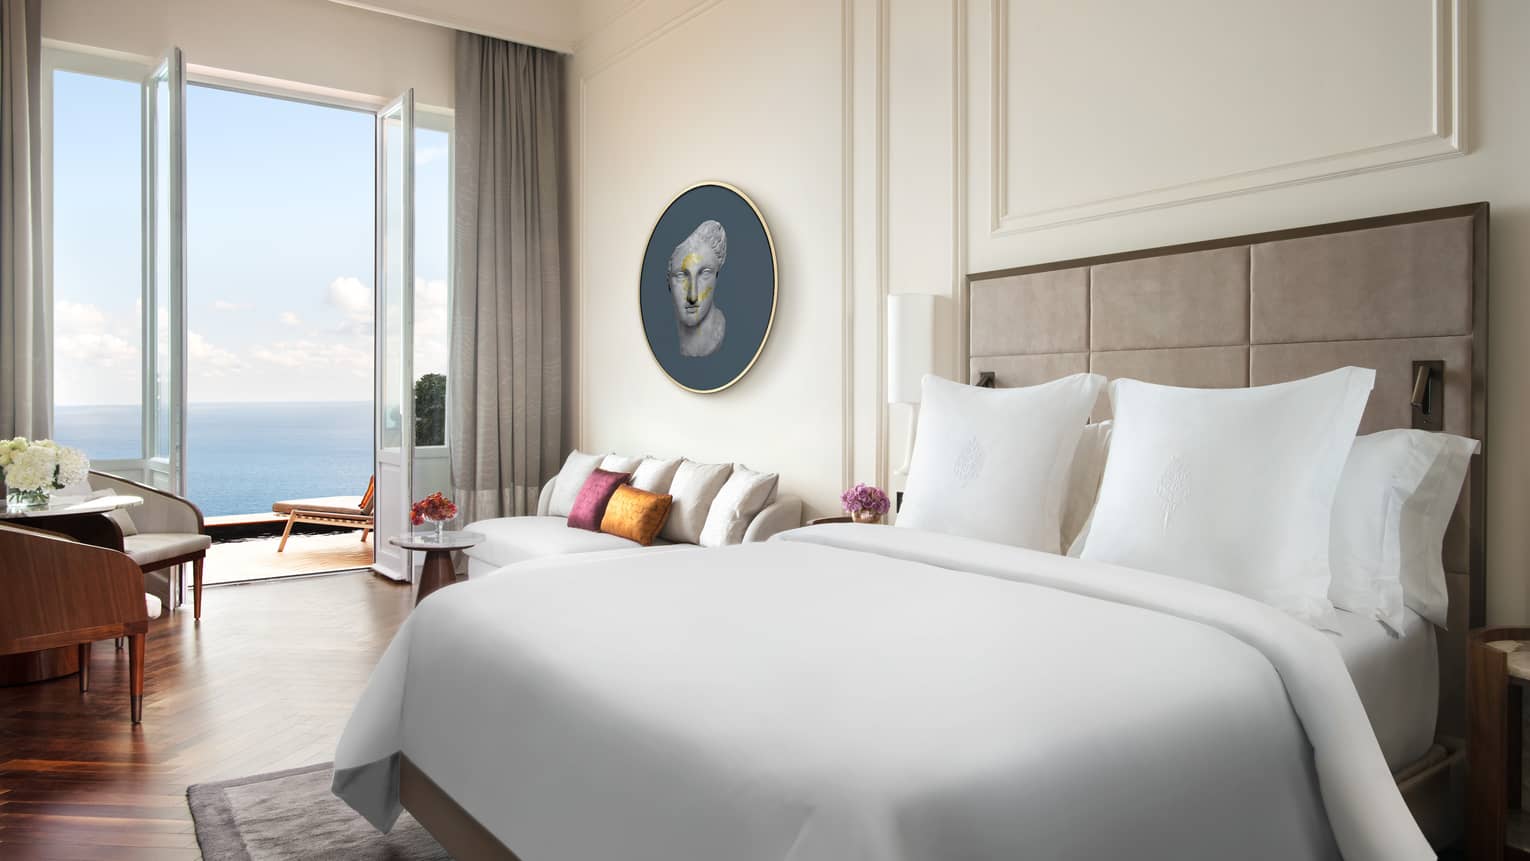 Hotel room with white king bed, white walls with crown molding, wood floors, walk-out sea-view balcony